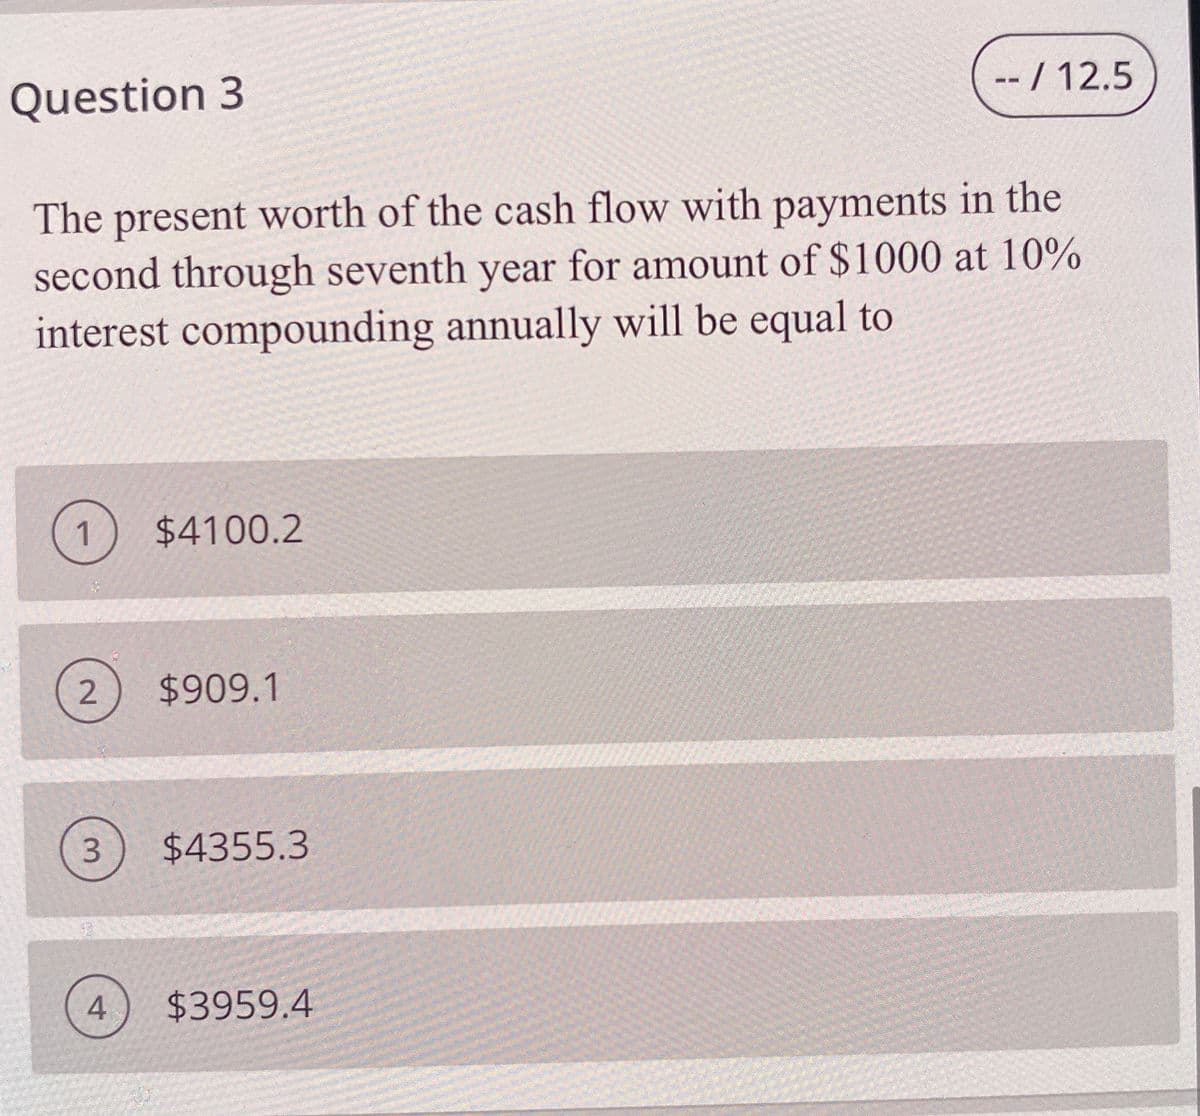 Question 3
- / 12.5
The present worth of the cash flow with payments in the
second through seventh year for amount of $1000 at 10%
interest compounding annually will be equal to
1
$4100.2
2
$909.1
3.
$4355.3
$3959.4
